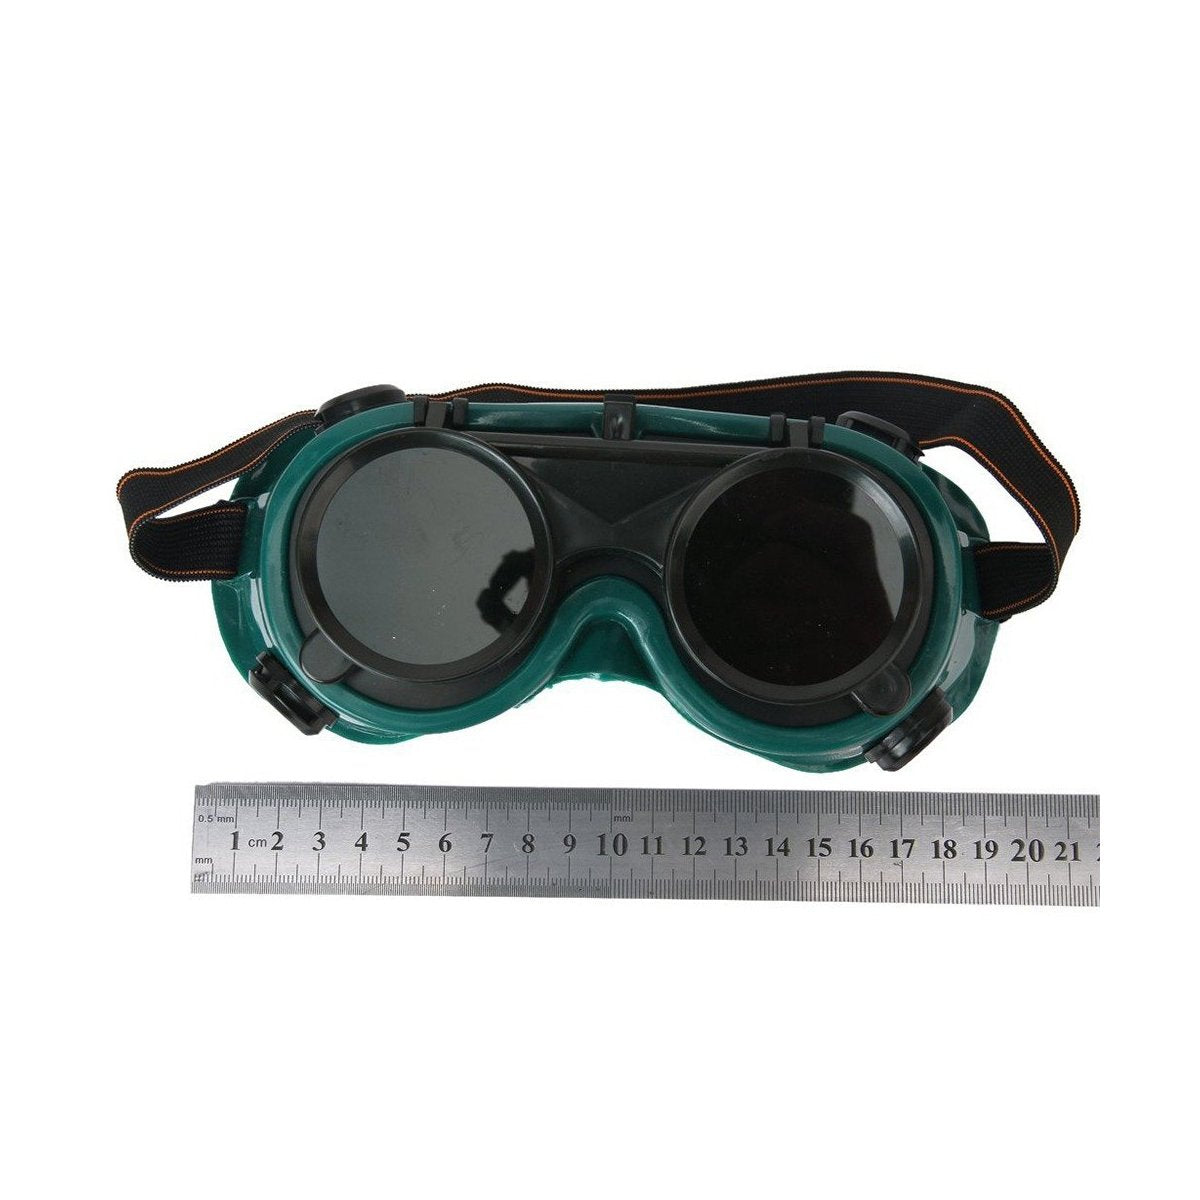 ambitionofcreativity in welding goggles flip up filter poly carbonated lens dark green large